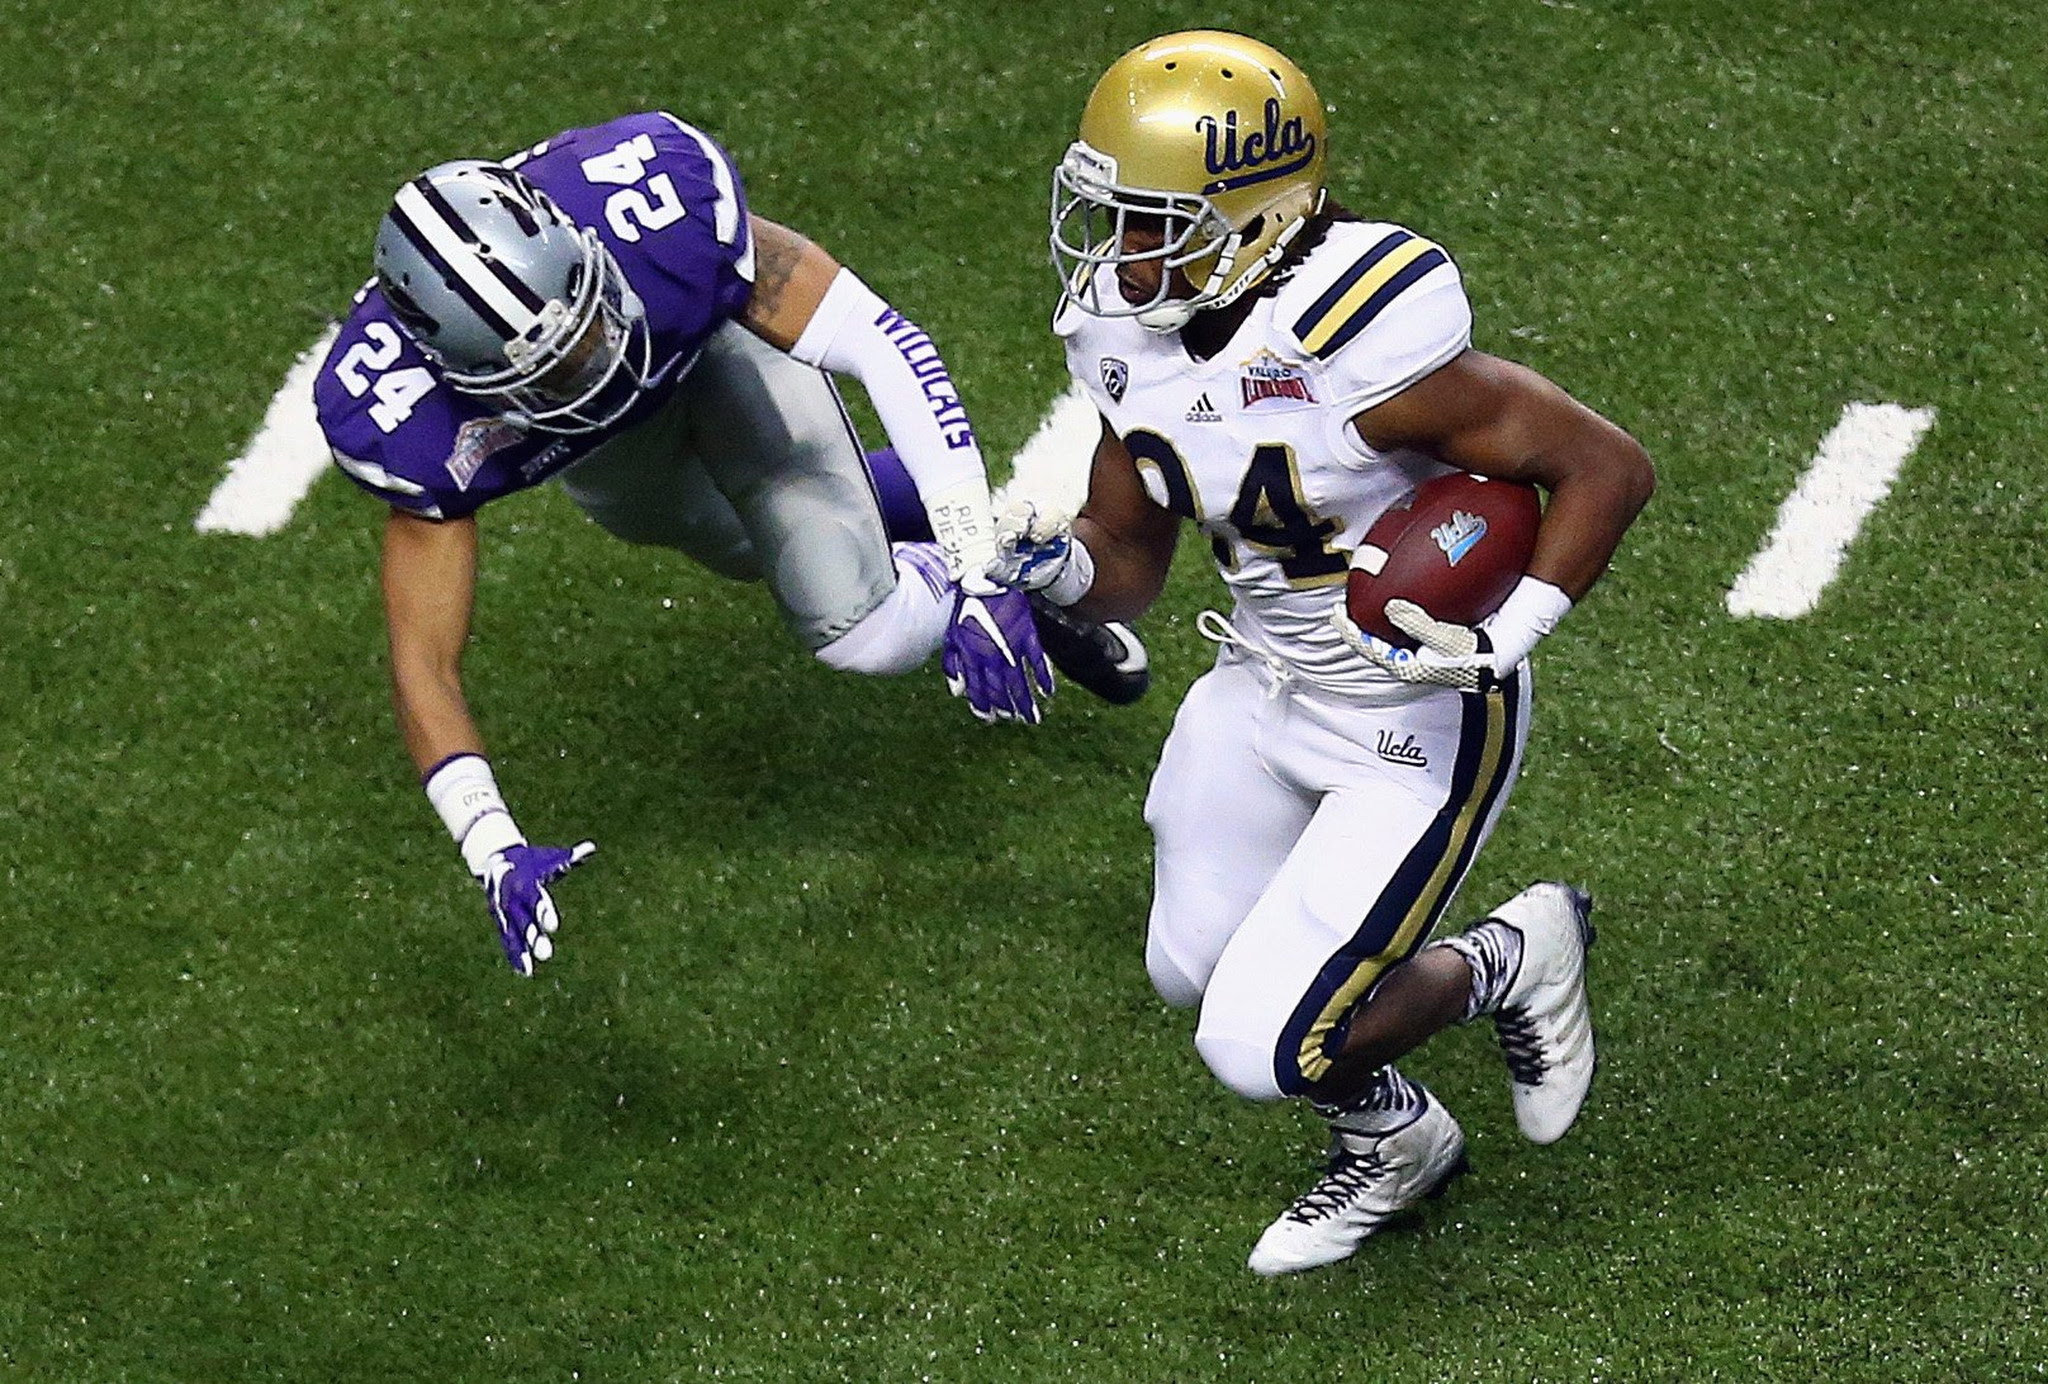 UCLA survives second-half scare from Kansas State in Alamo Bowl